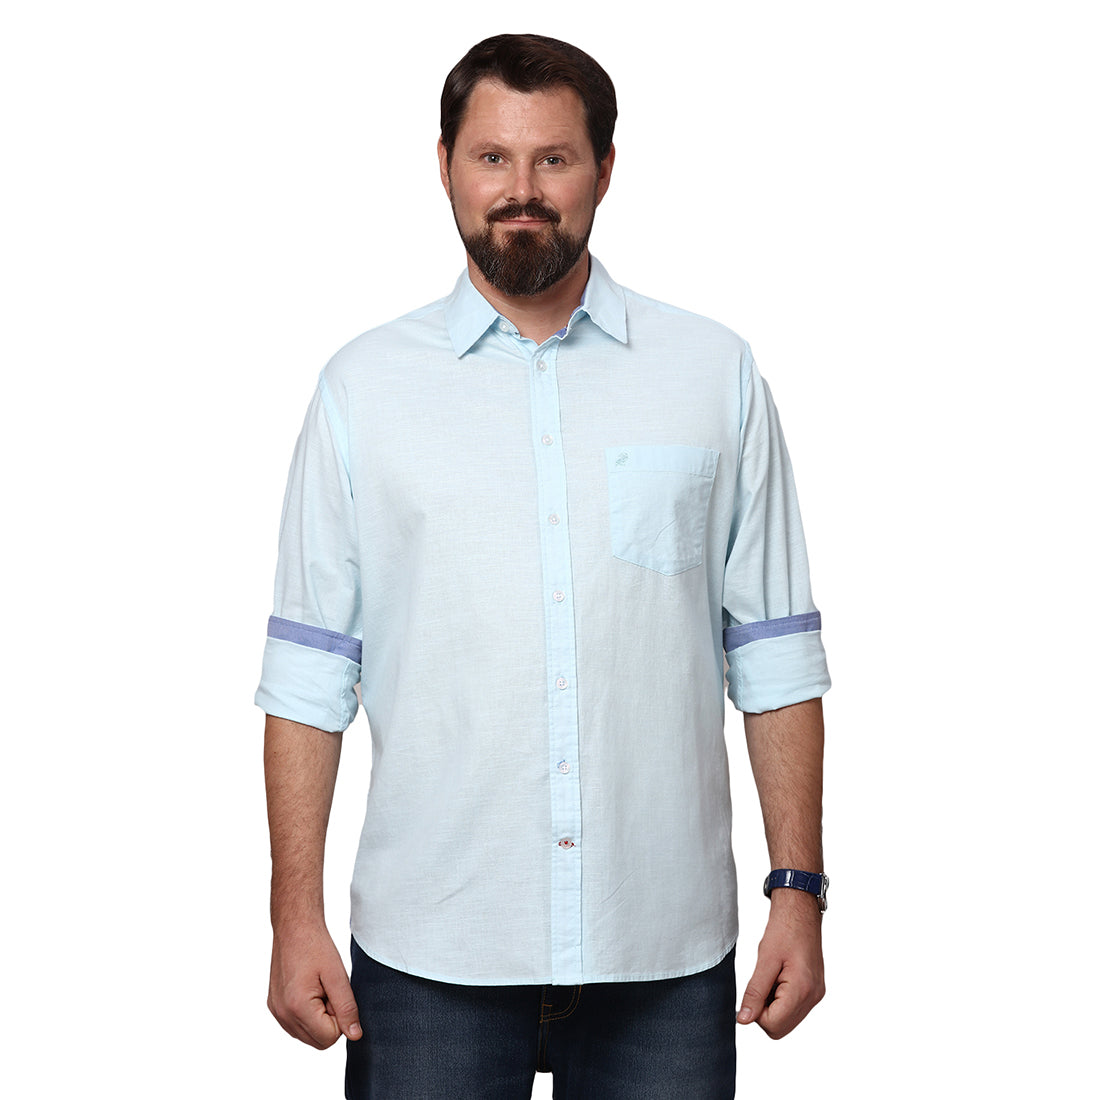 Big & Bold Solid Sky Blue Full Sleeves Slim Fit Casual Shirts (Plus Size) - Double Two